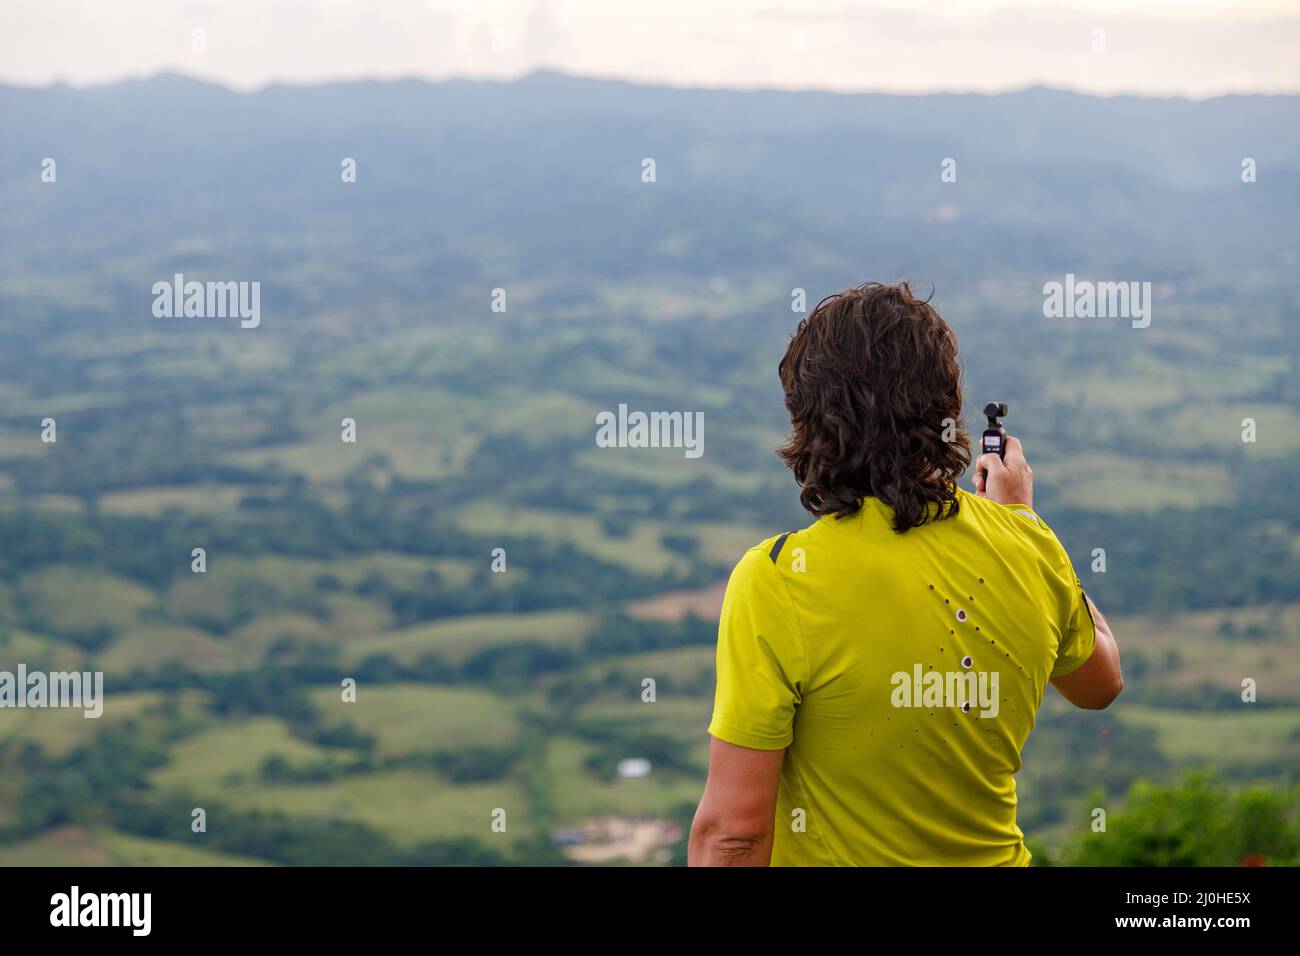 A man stands on a mountain and shoots a video on a modern miniature camera. Stock Photo